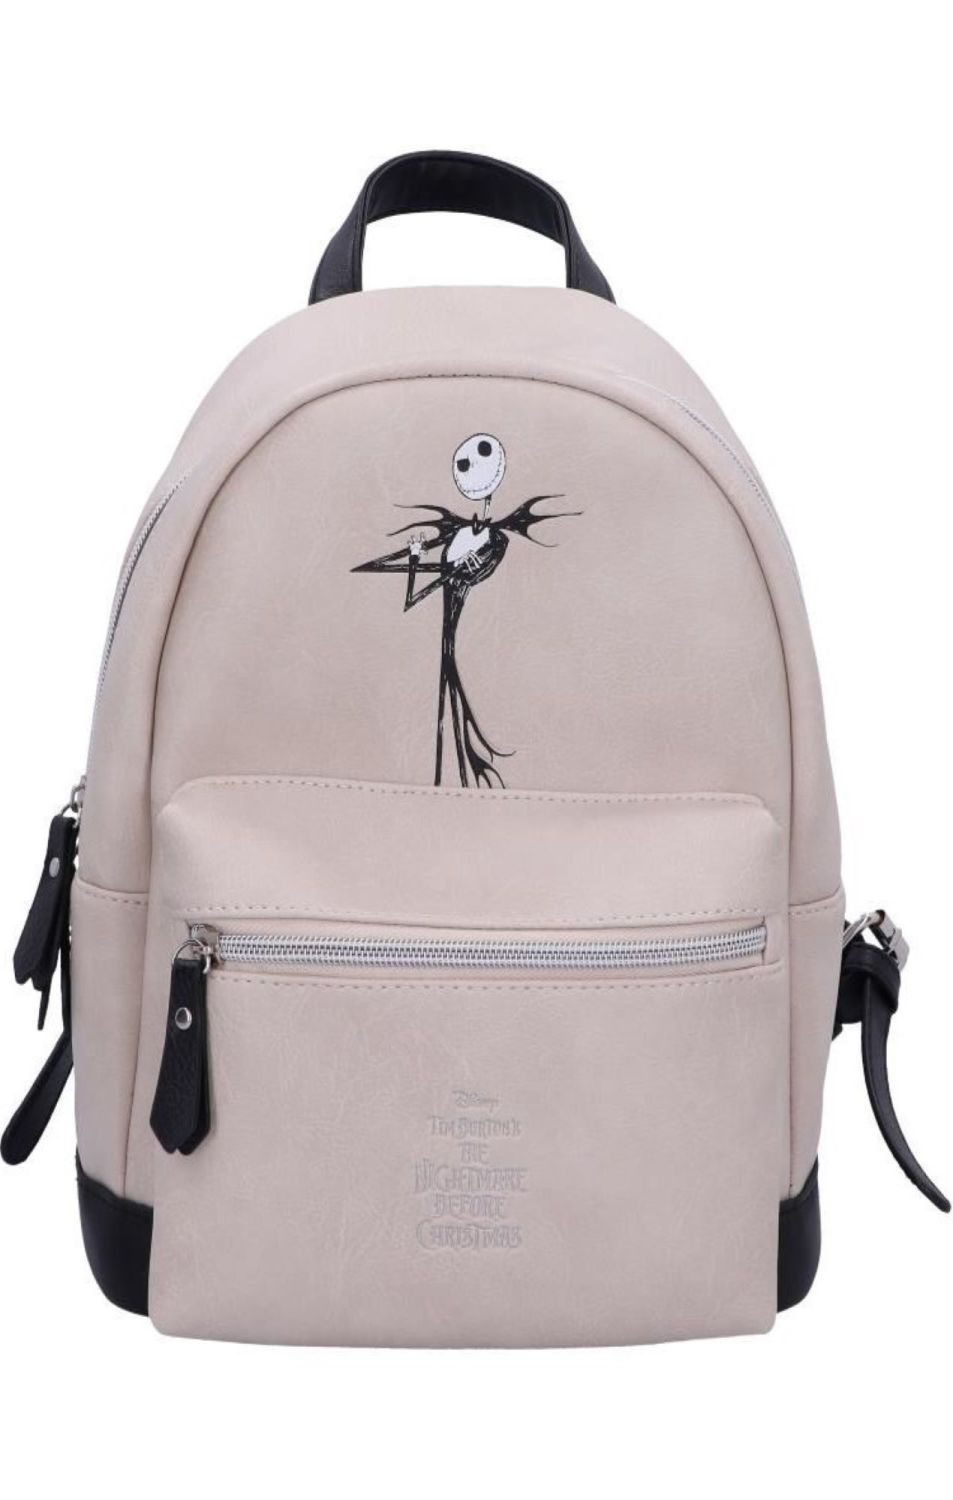 Official nightmare before Christmas backpack RRP £59.99